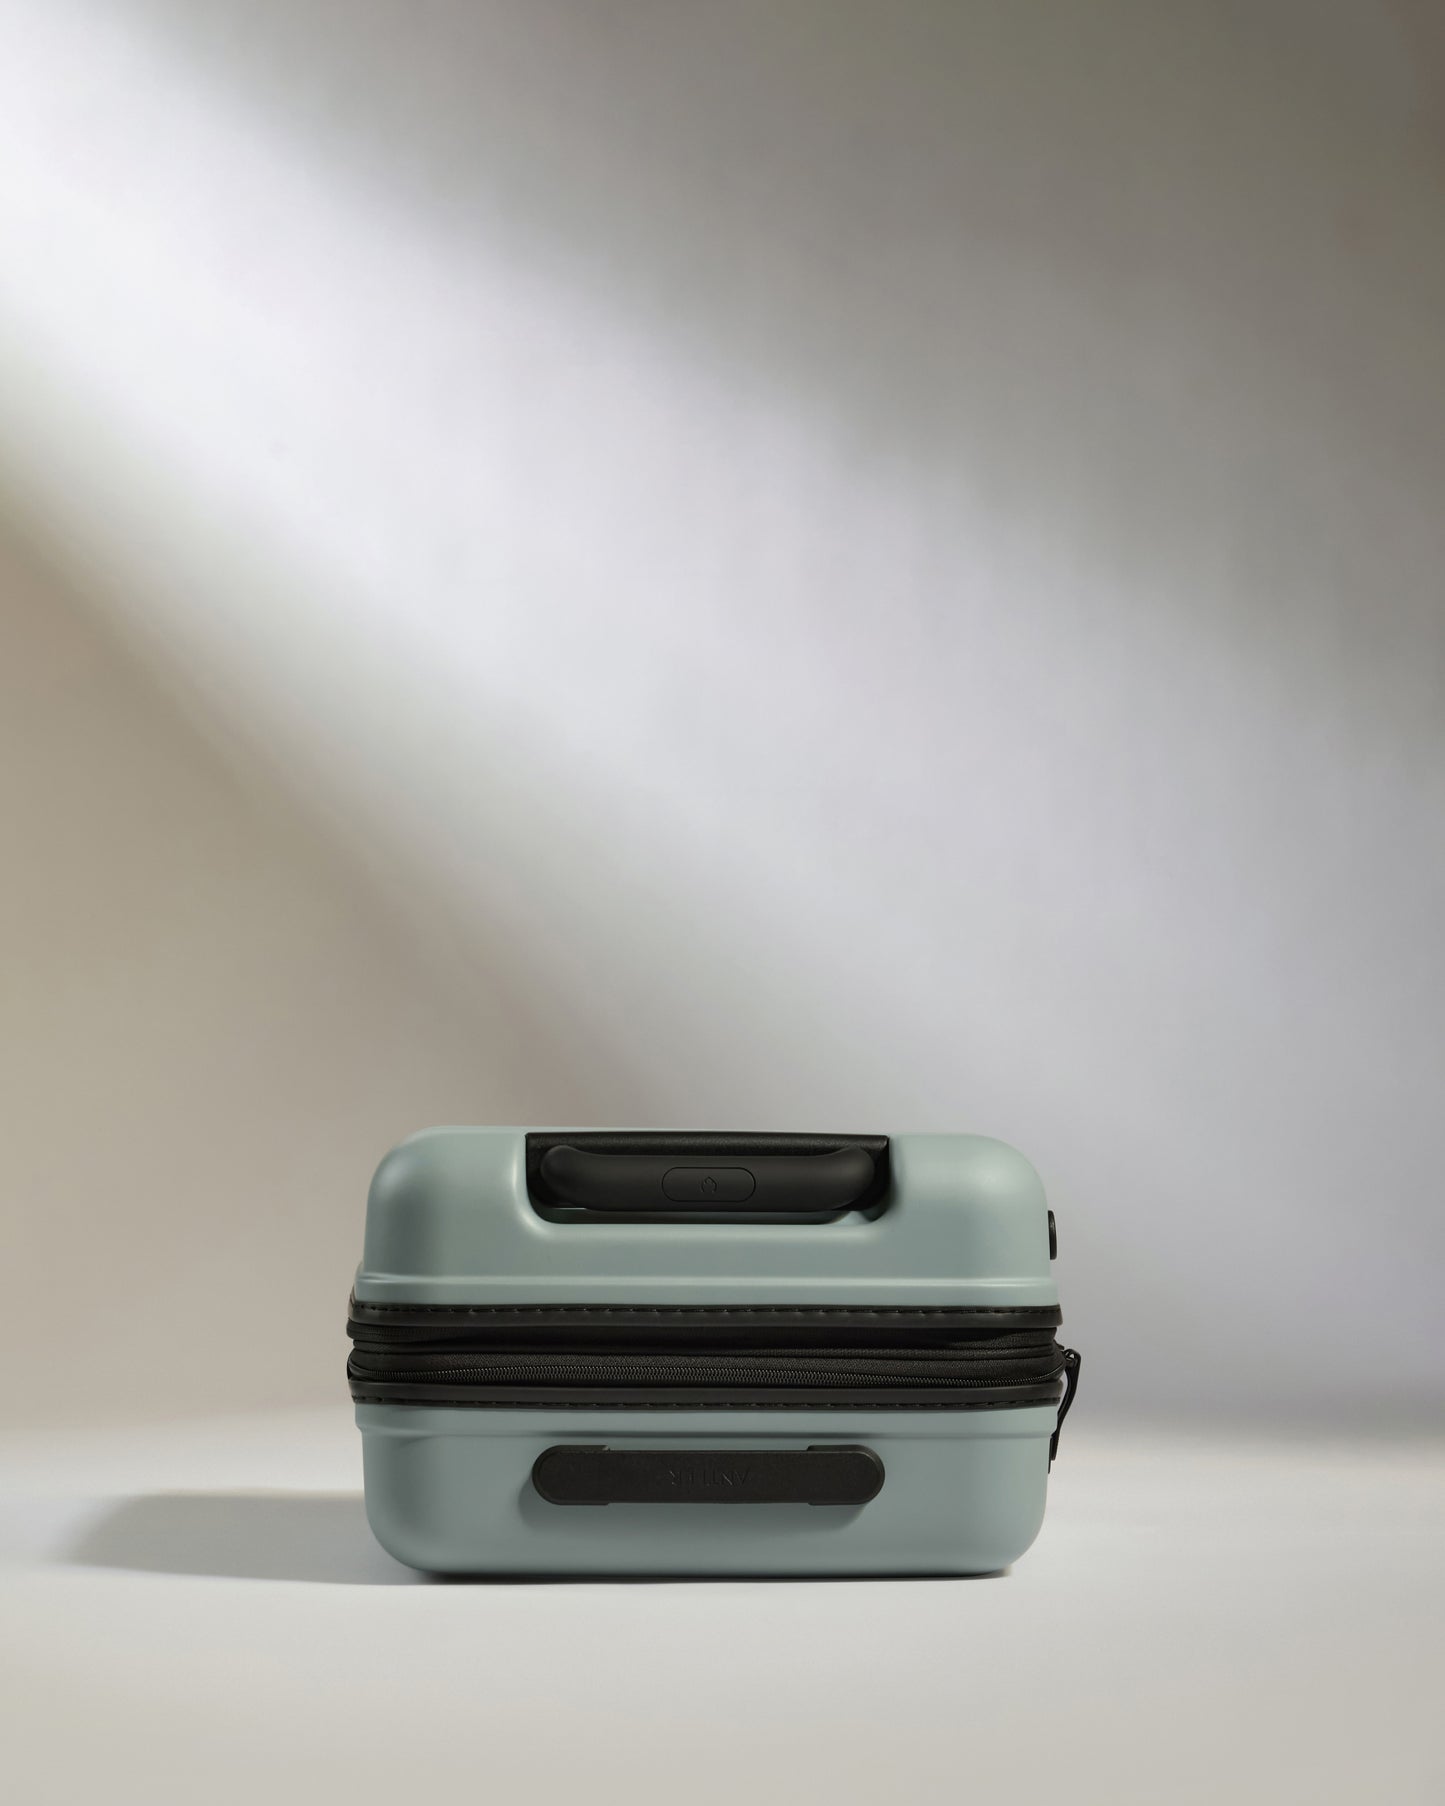 Icon Stripe Carry-On with Expander in Mist Blue